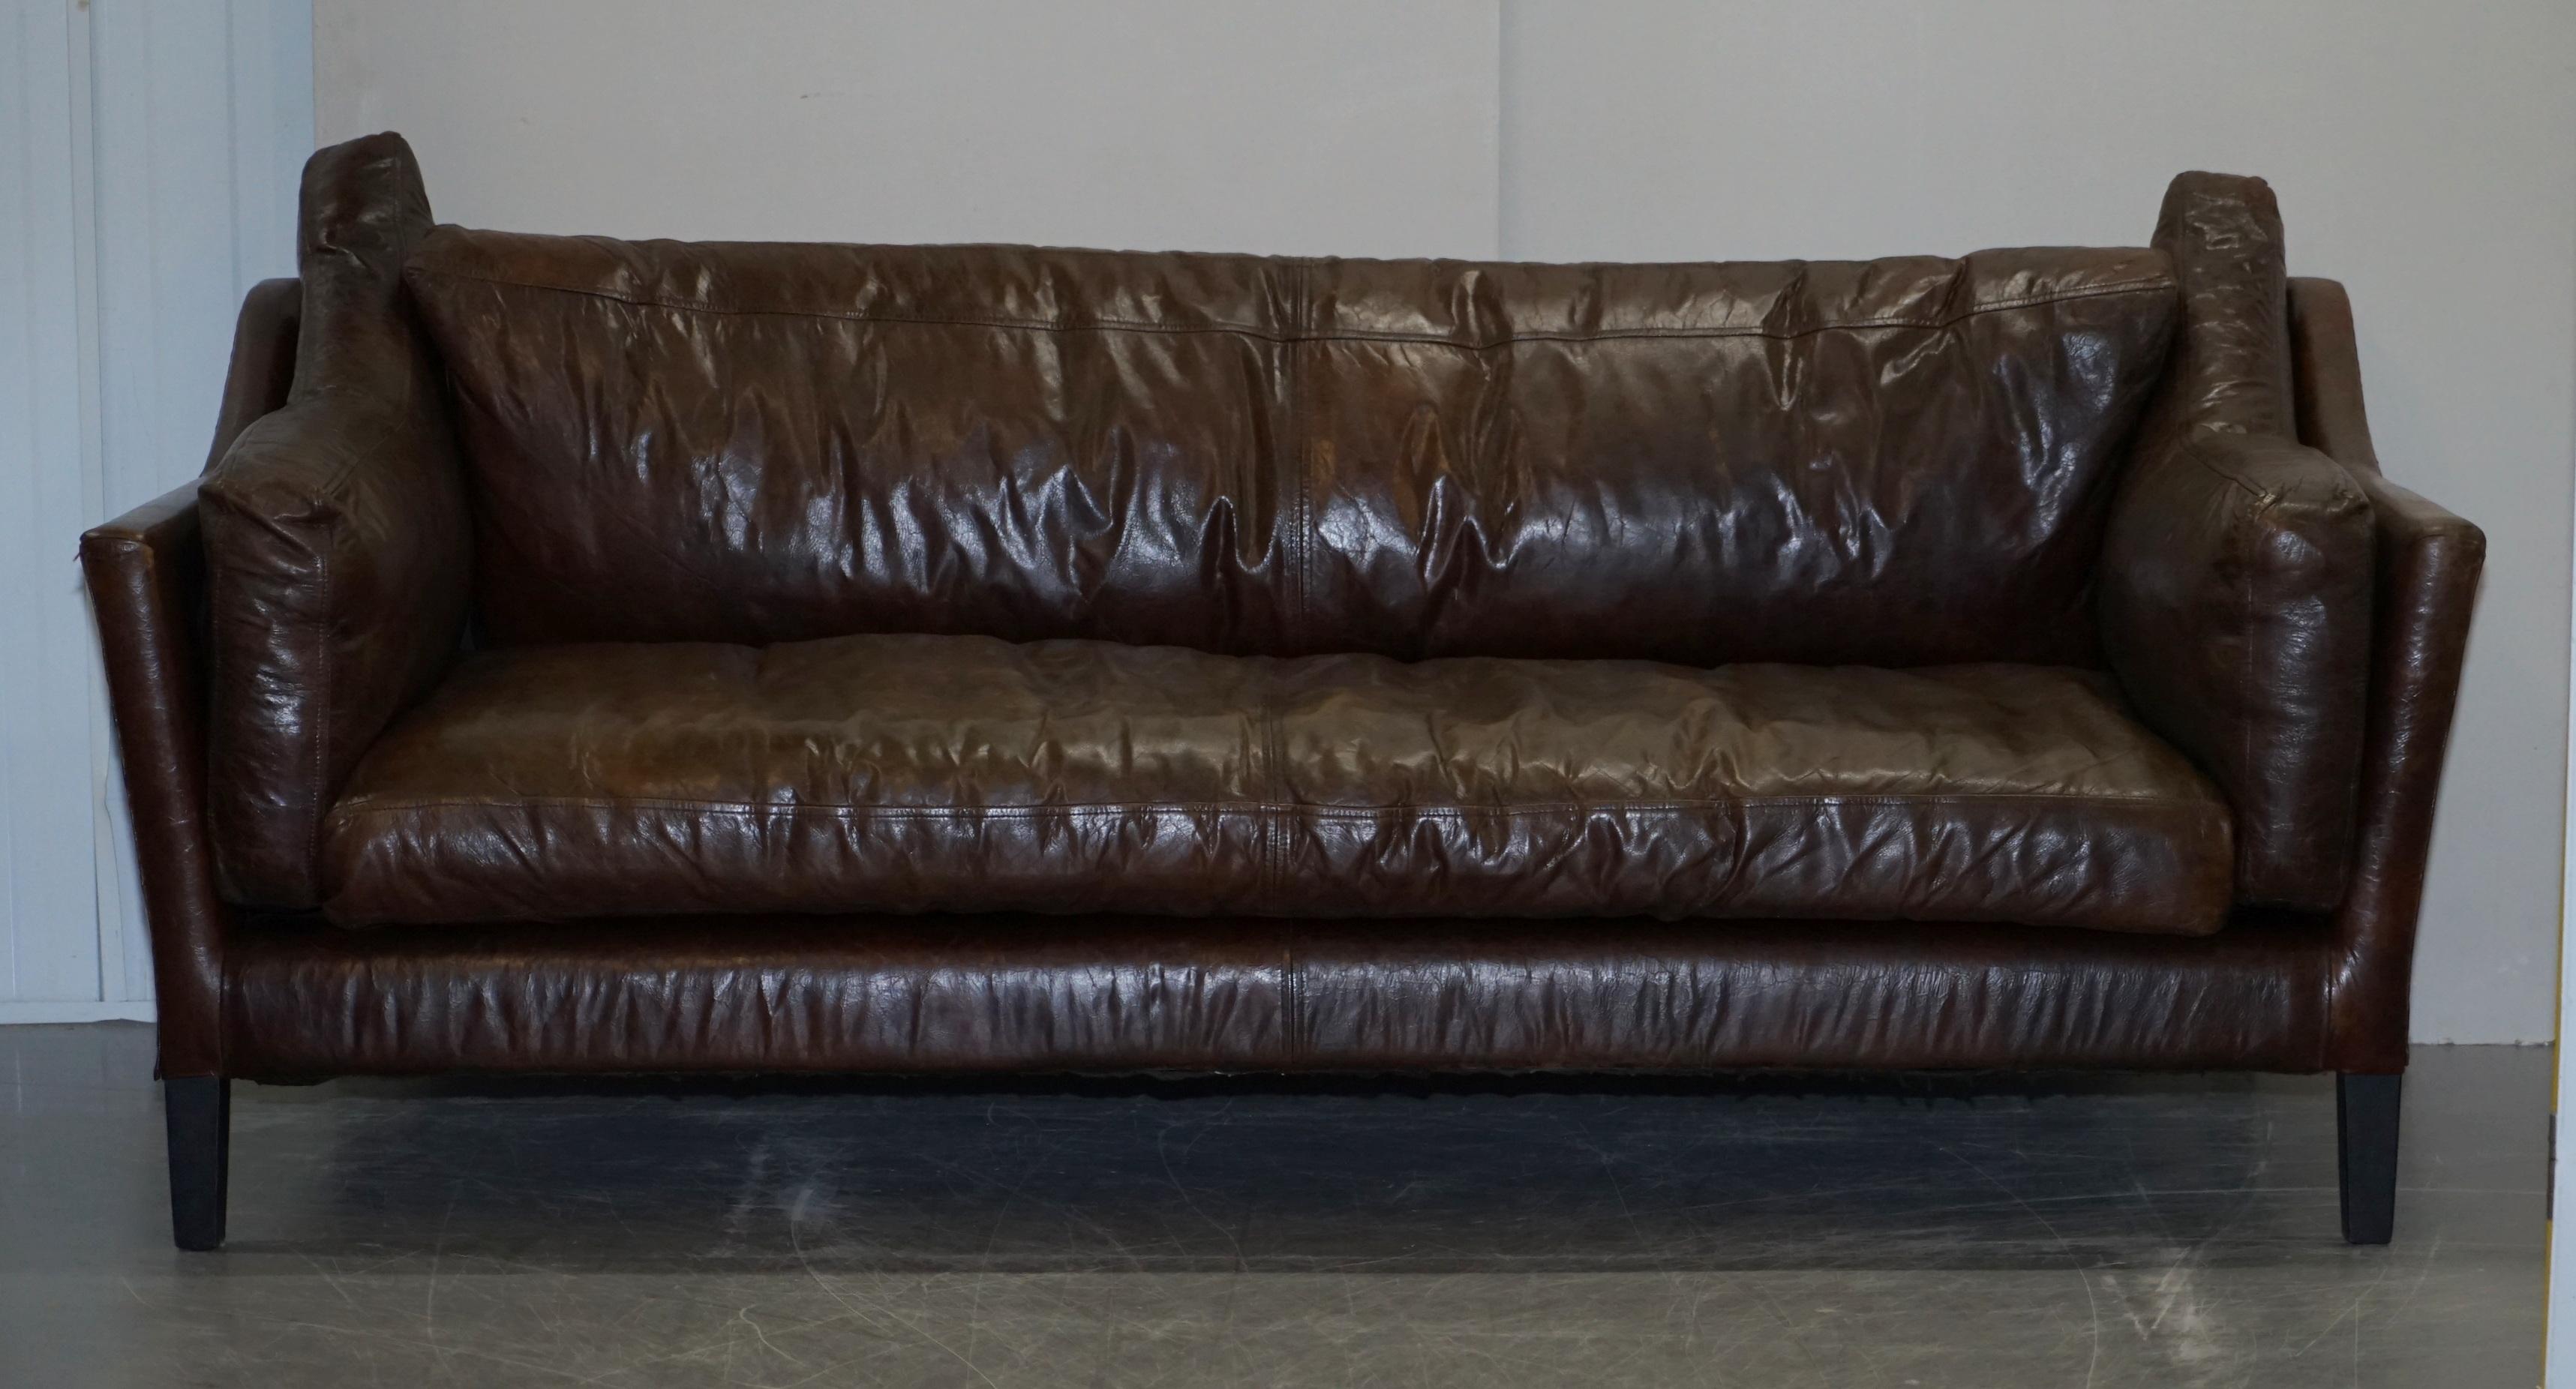 We are delighted to offer for sale this very comfortable had dyed brown leather designer styled three seat sofa

A very good looking decorative and comfortable sofa, this piece came from Dublin in Ireland, it has a very cool art modern look and